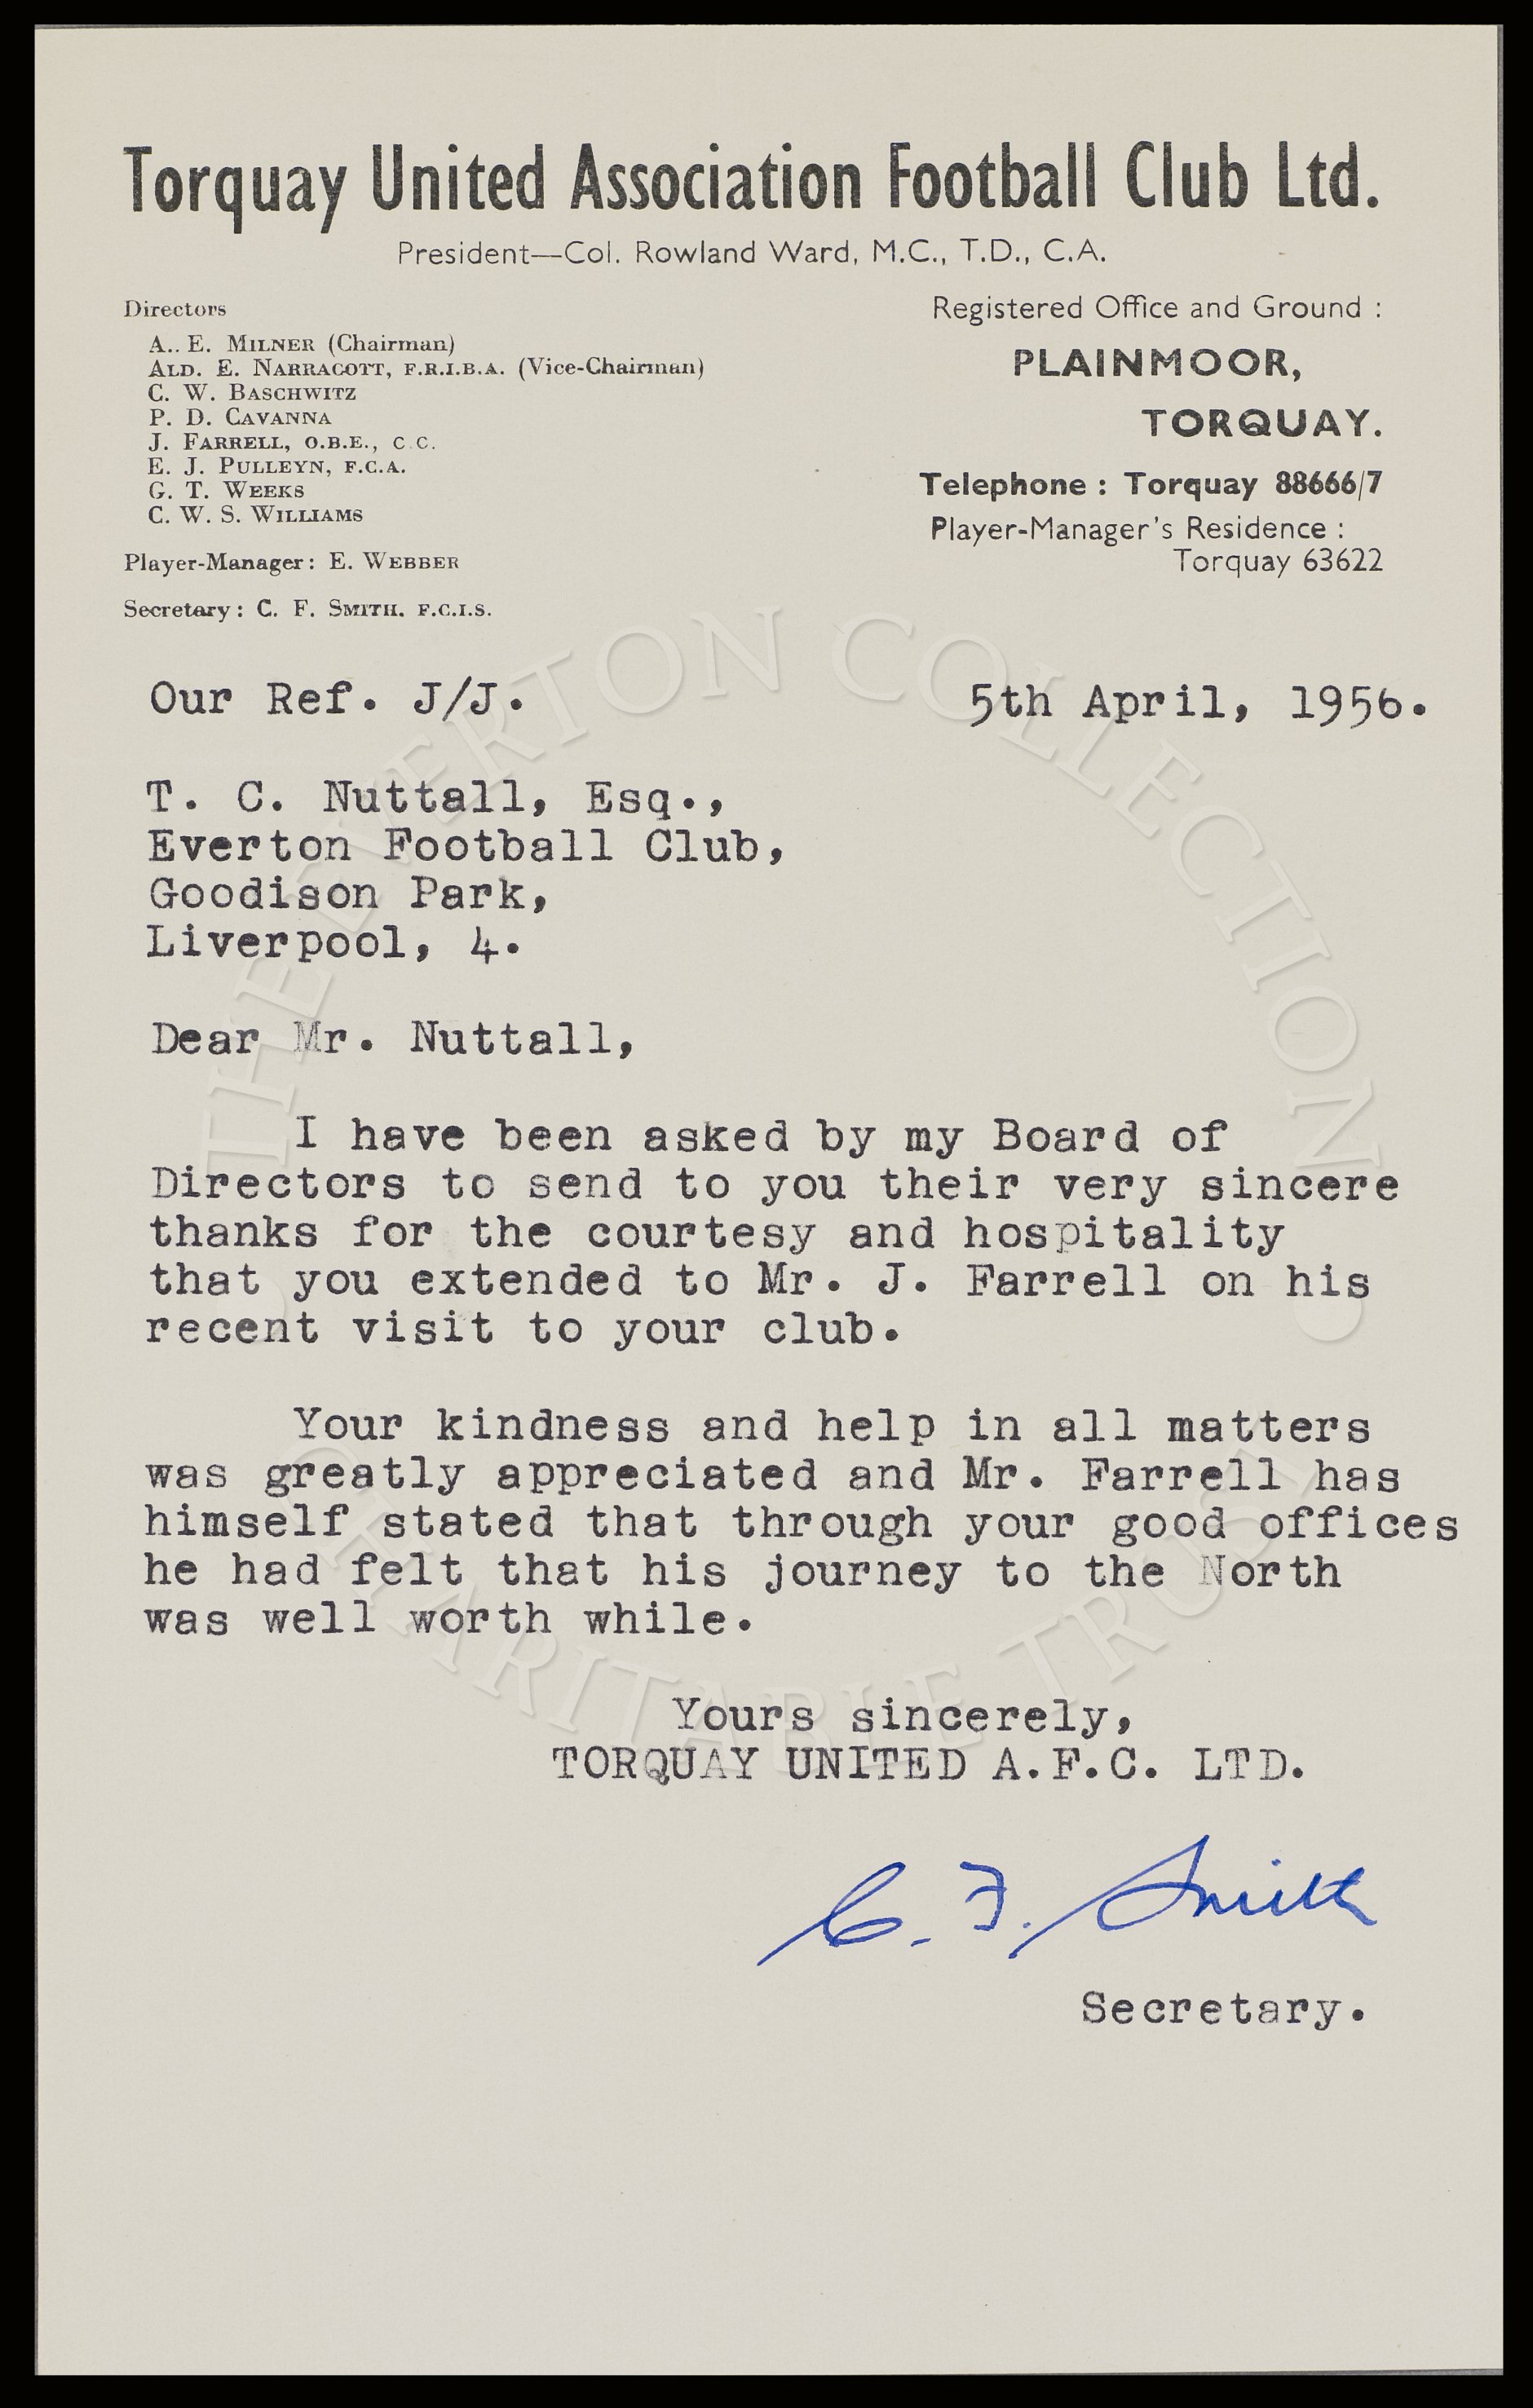 Letter with other Club